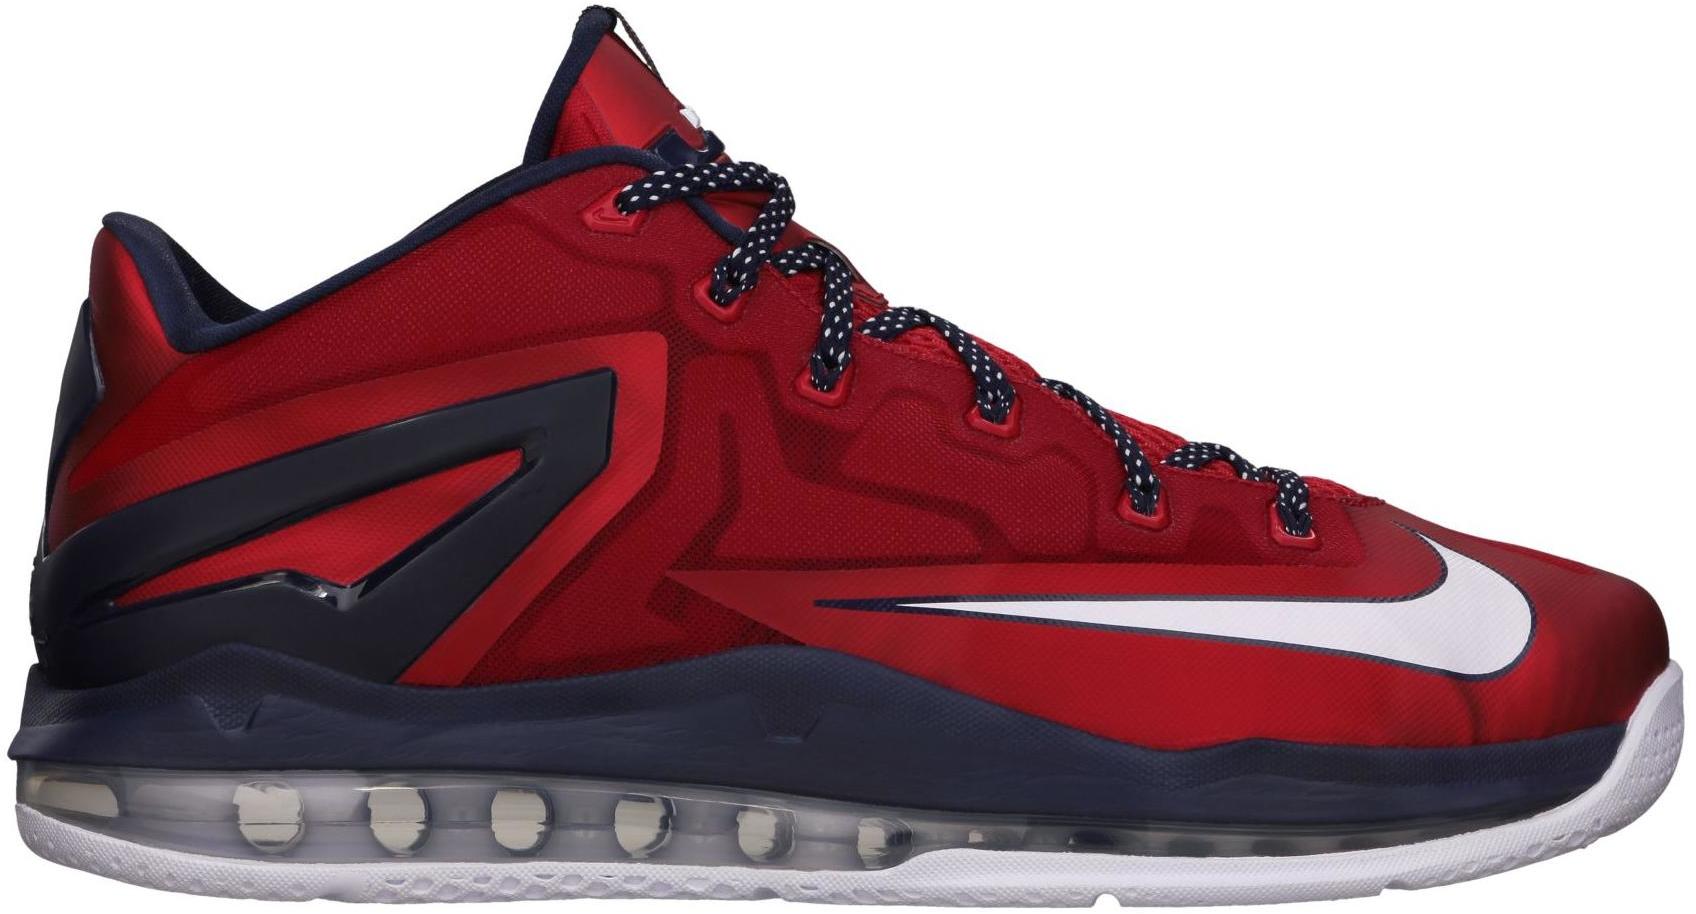 lebron independence day